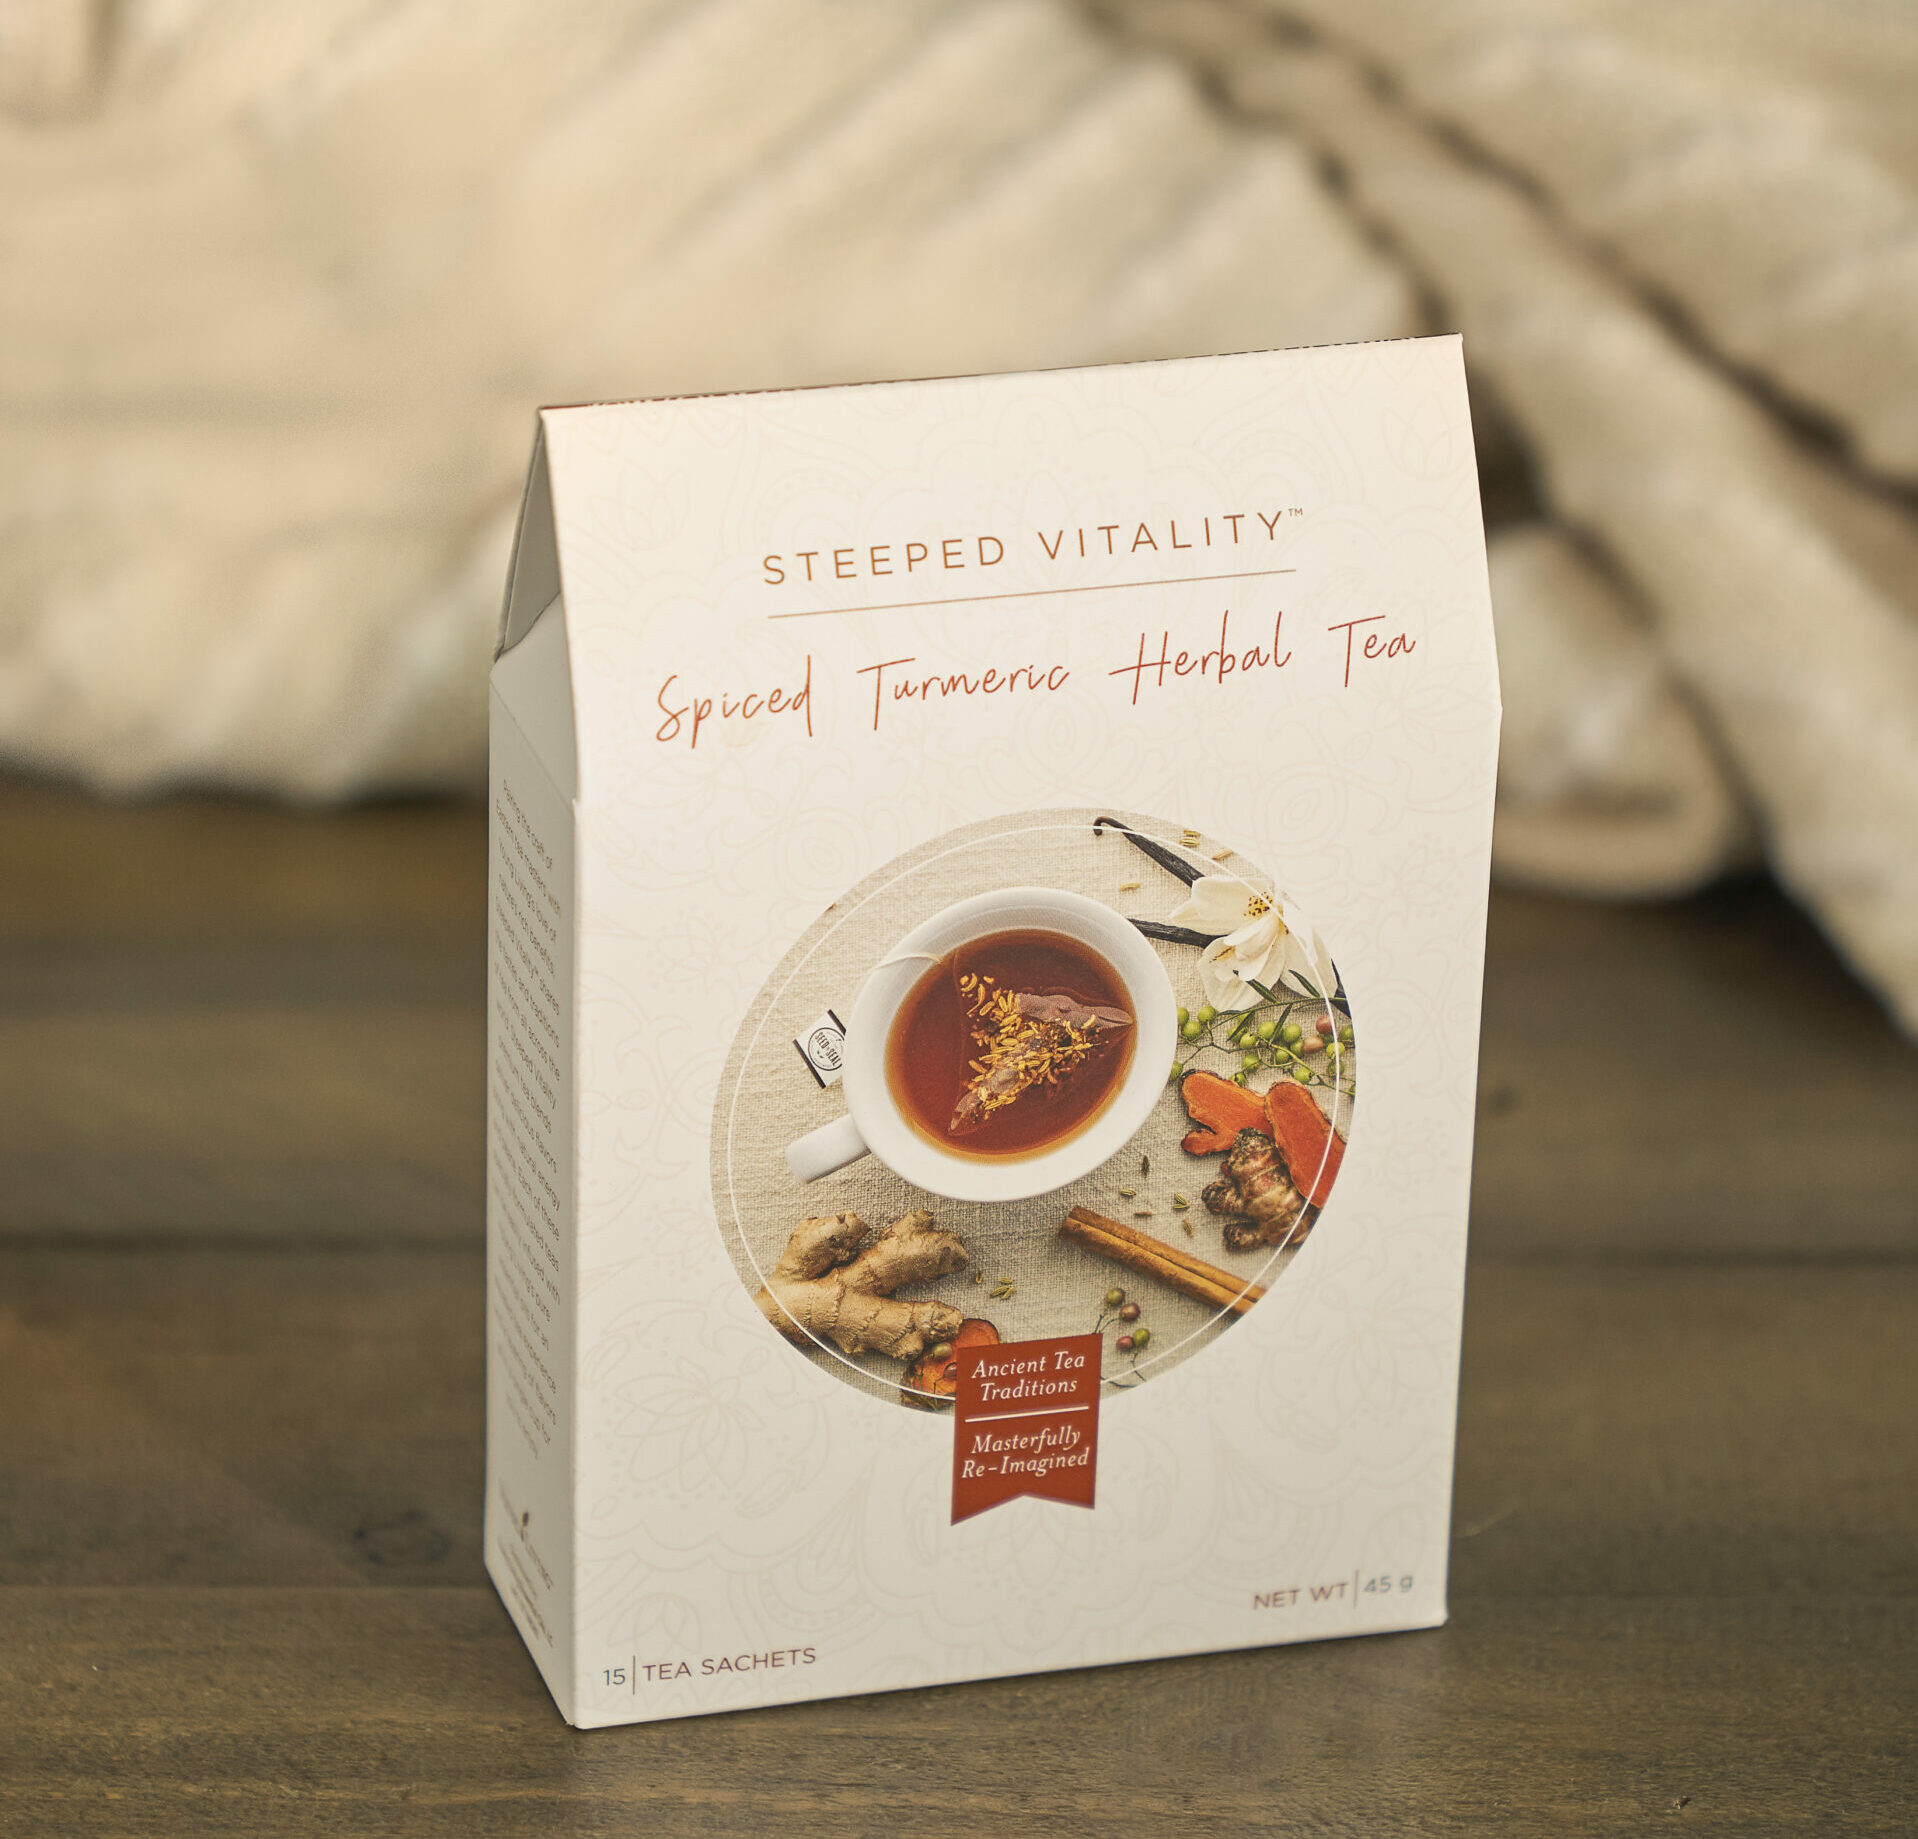 Spiced Turmeric Herbal Tea - Young Living Essential Oils 